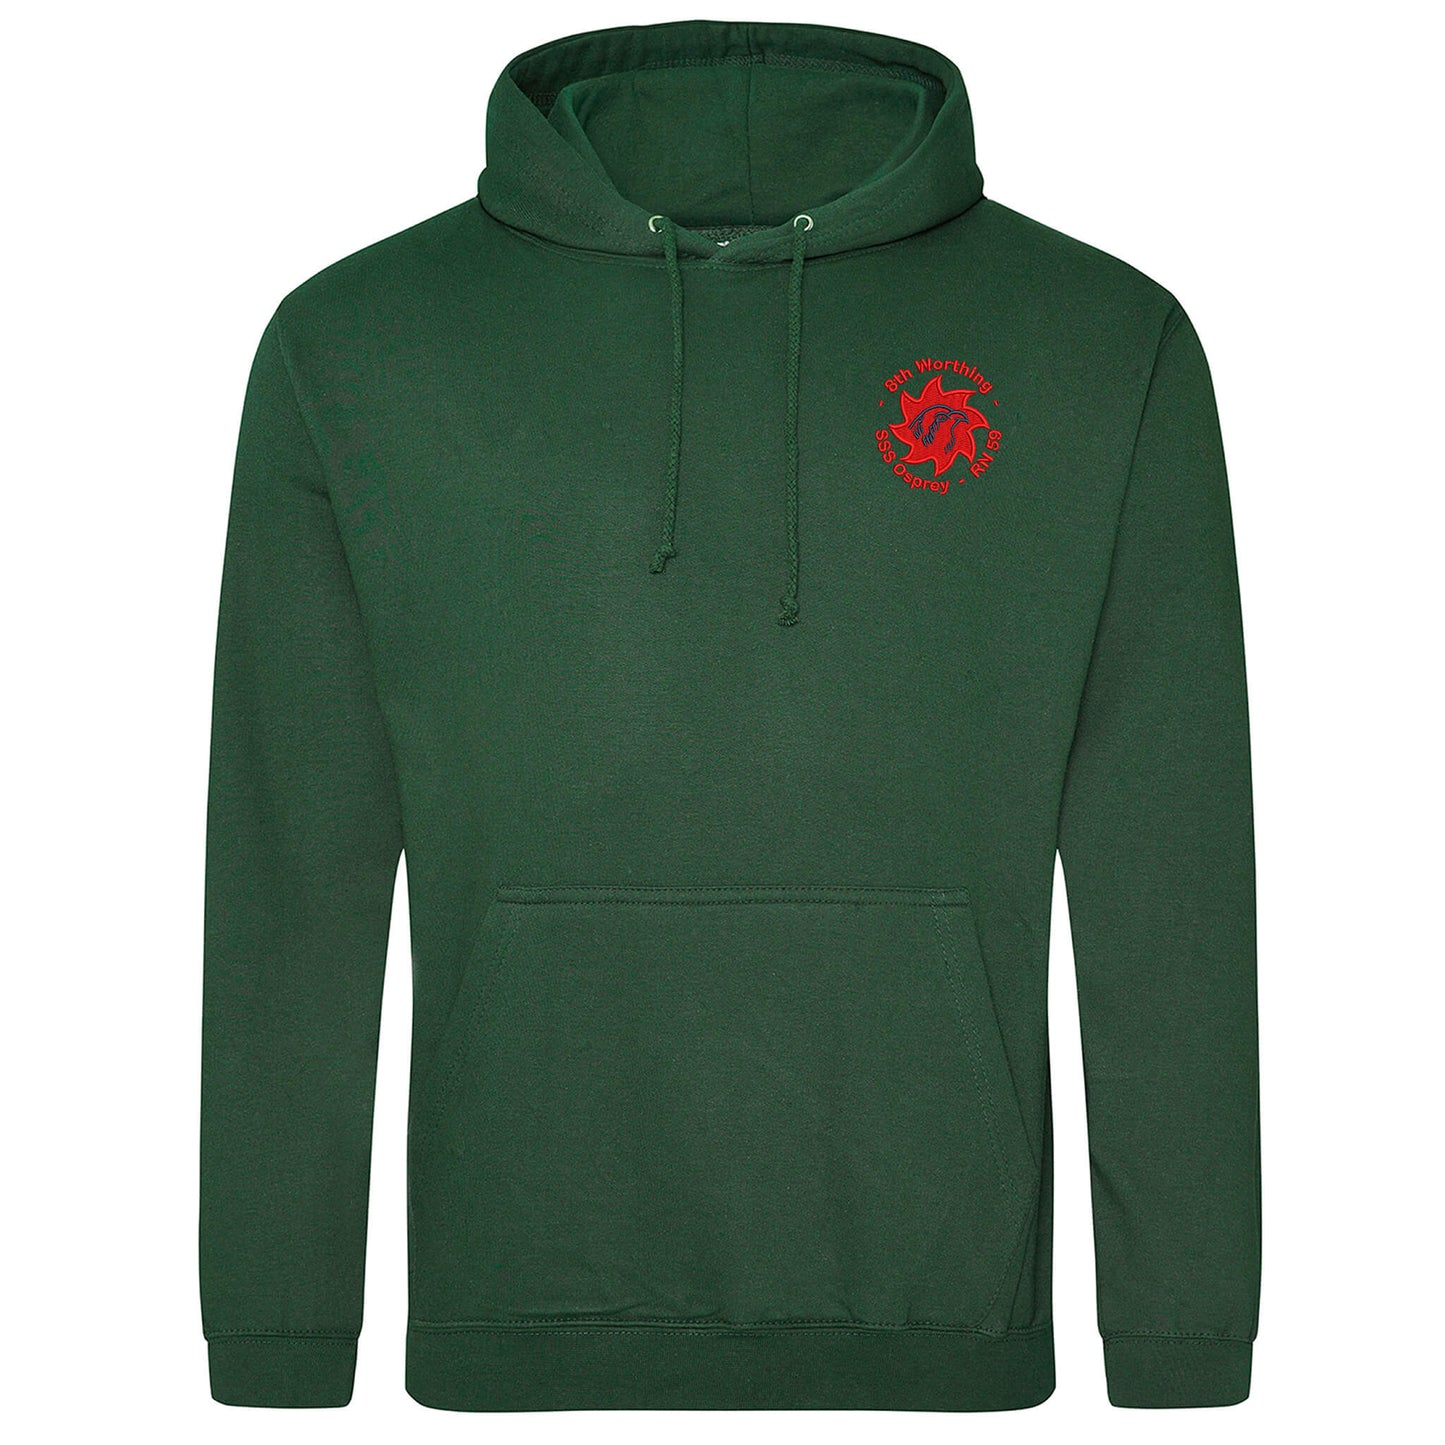 8th WORTHING SEA SCOUTS YOUTH CUBS EMBROIDERED HOODIE - Flamingo Rock®